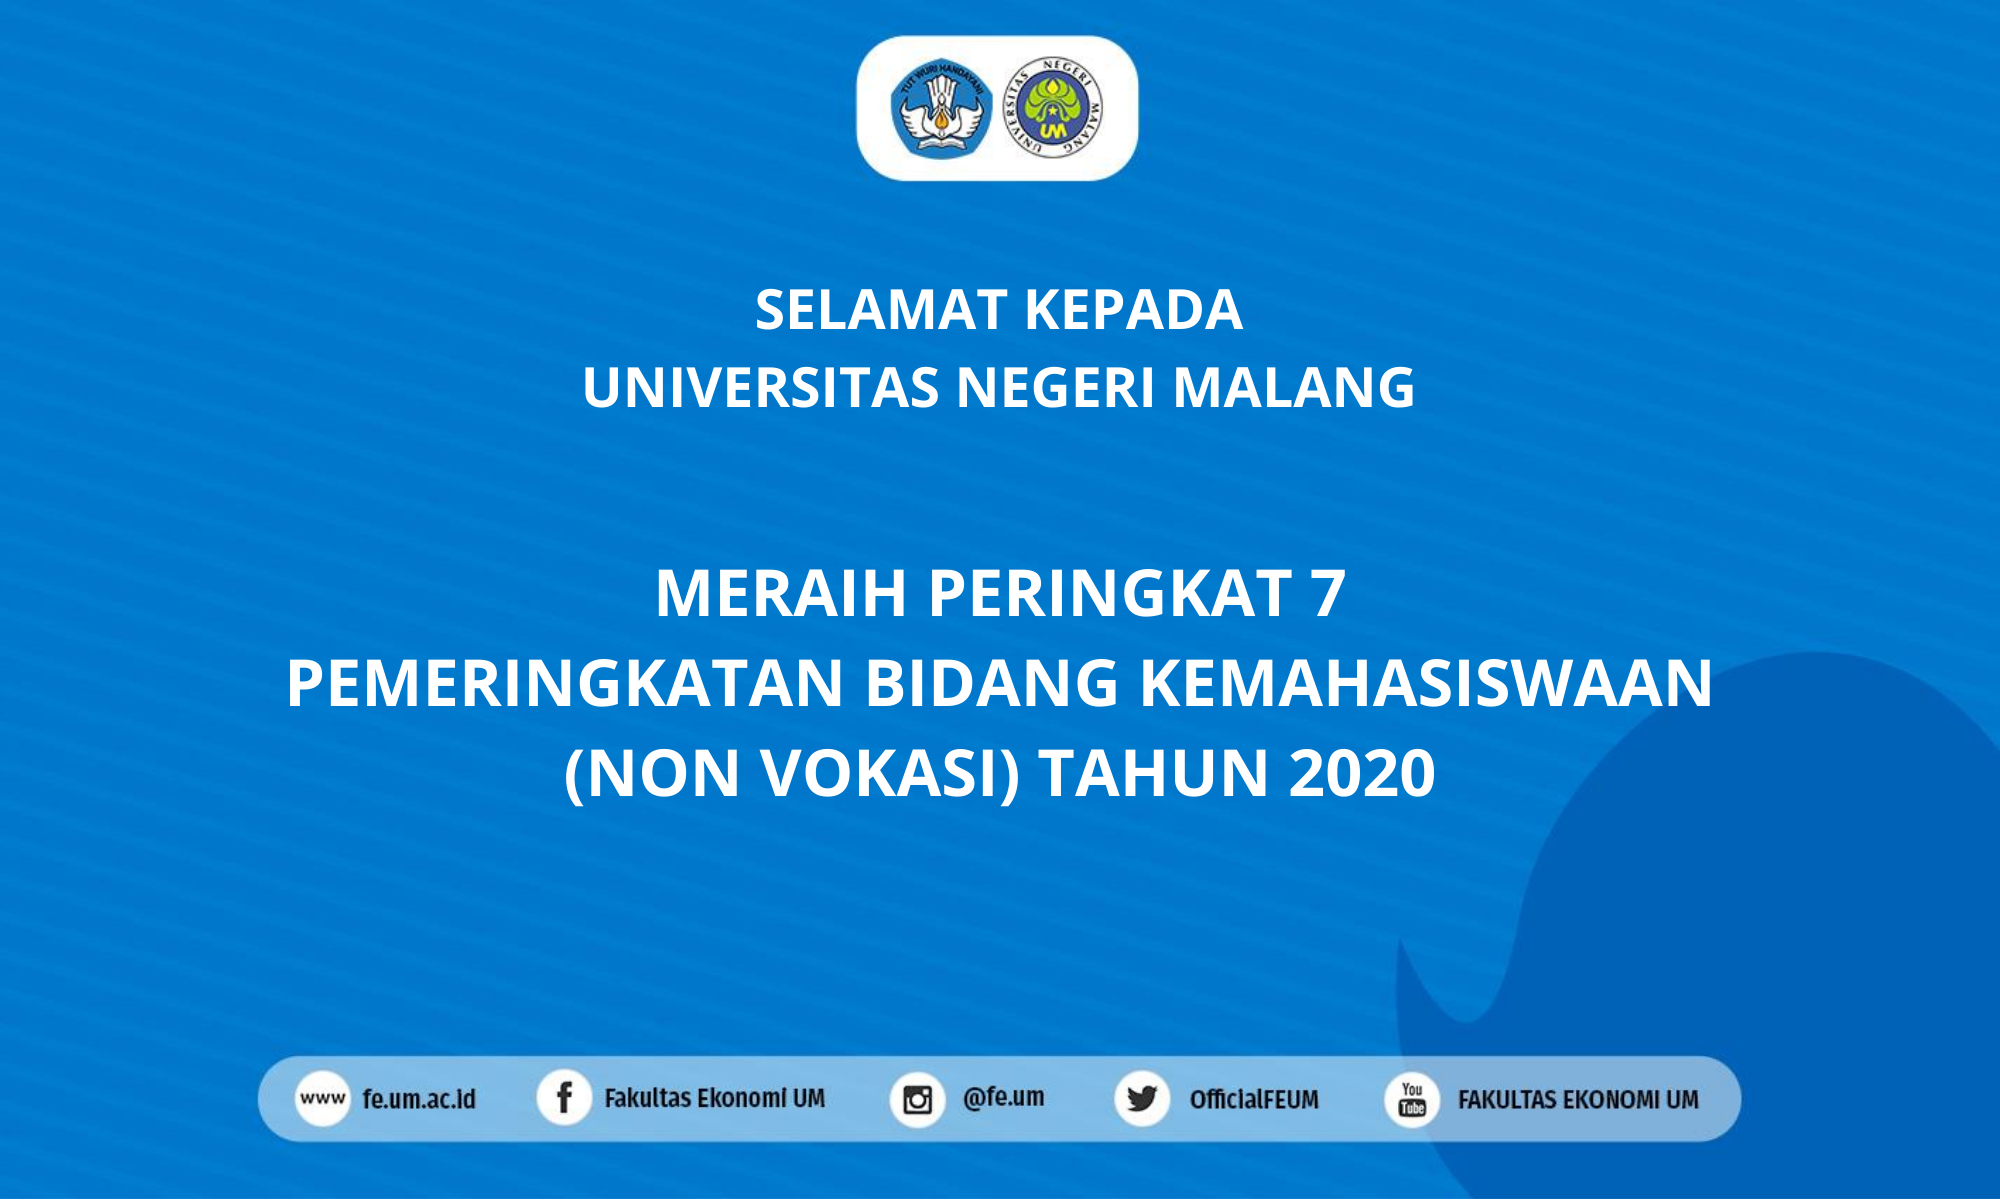 Congratulations to State University of Malang for the 7th Place for Student Affairs (Non Vocational) in 2020